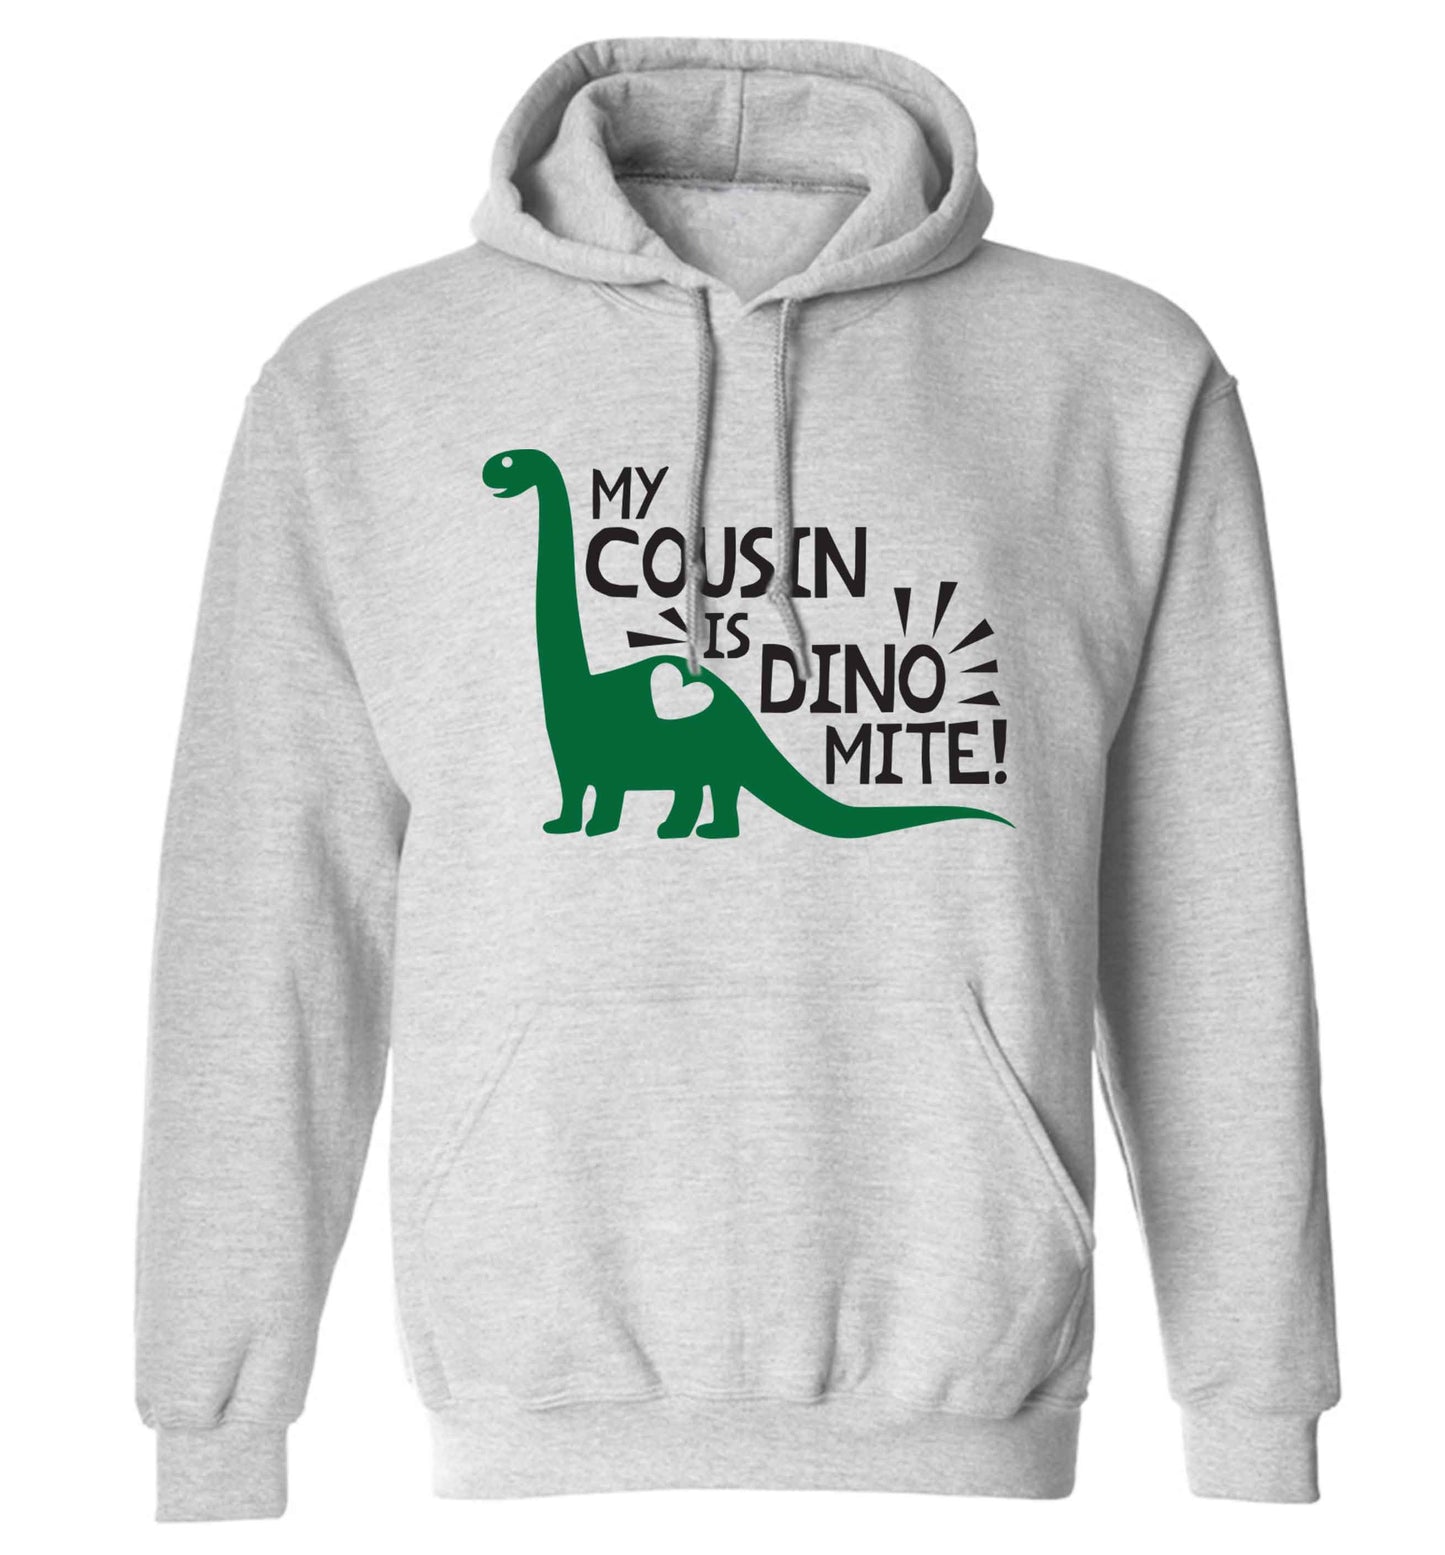 My cousin is dinomite! adults unisex grey hoodie 2XL